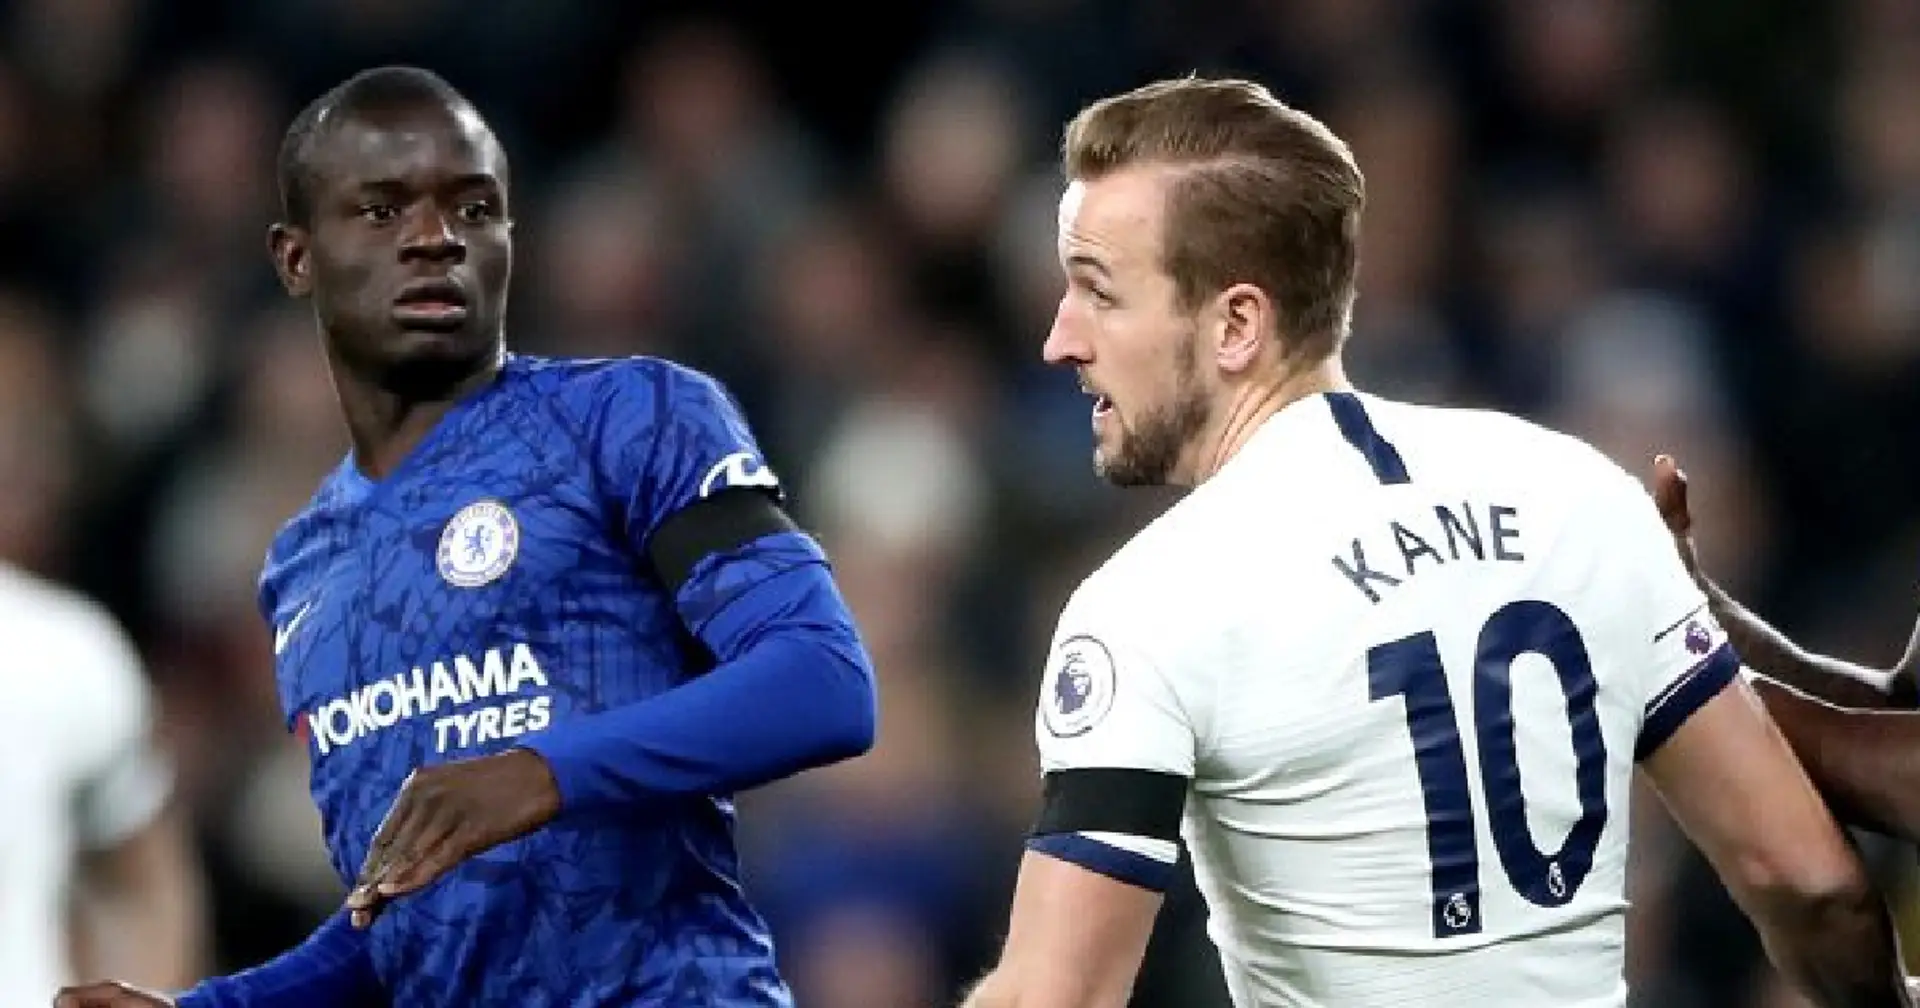 Chelsea vs Tottenham: Team news, predicted line-up, score predictions and more - preview